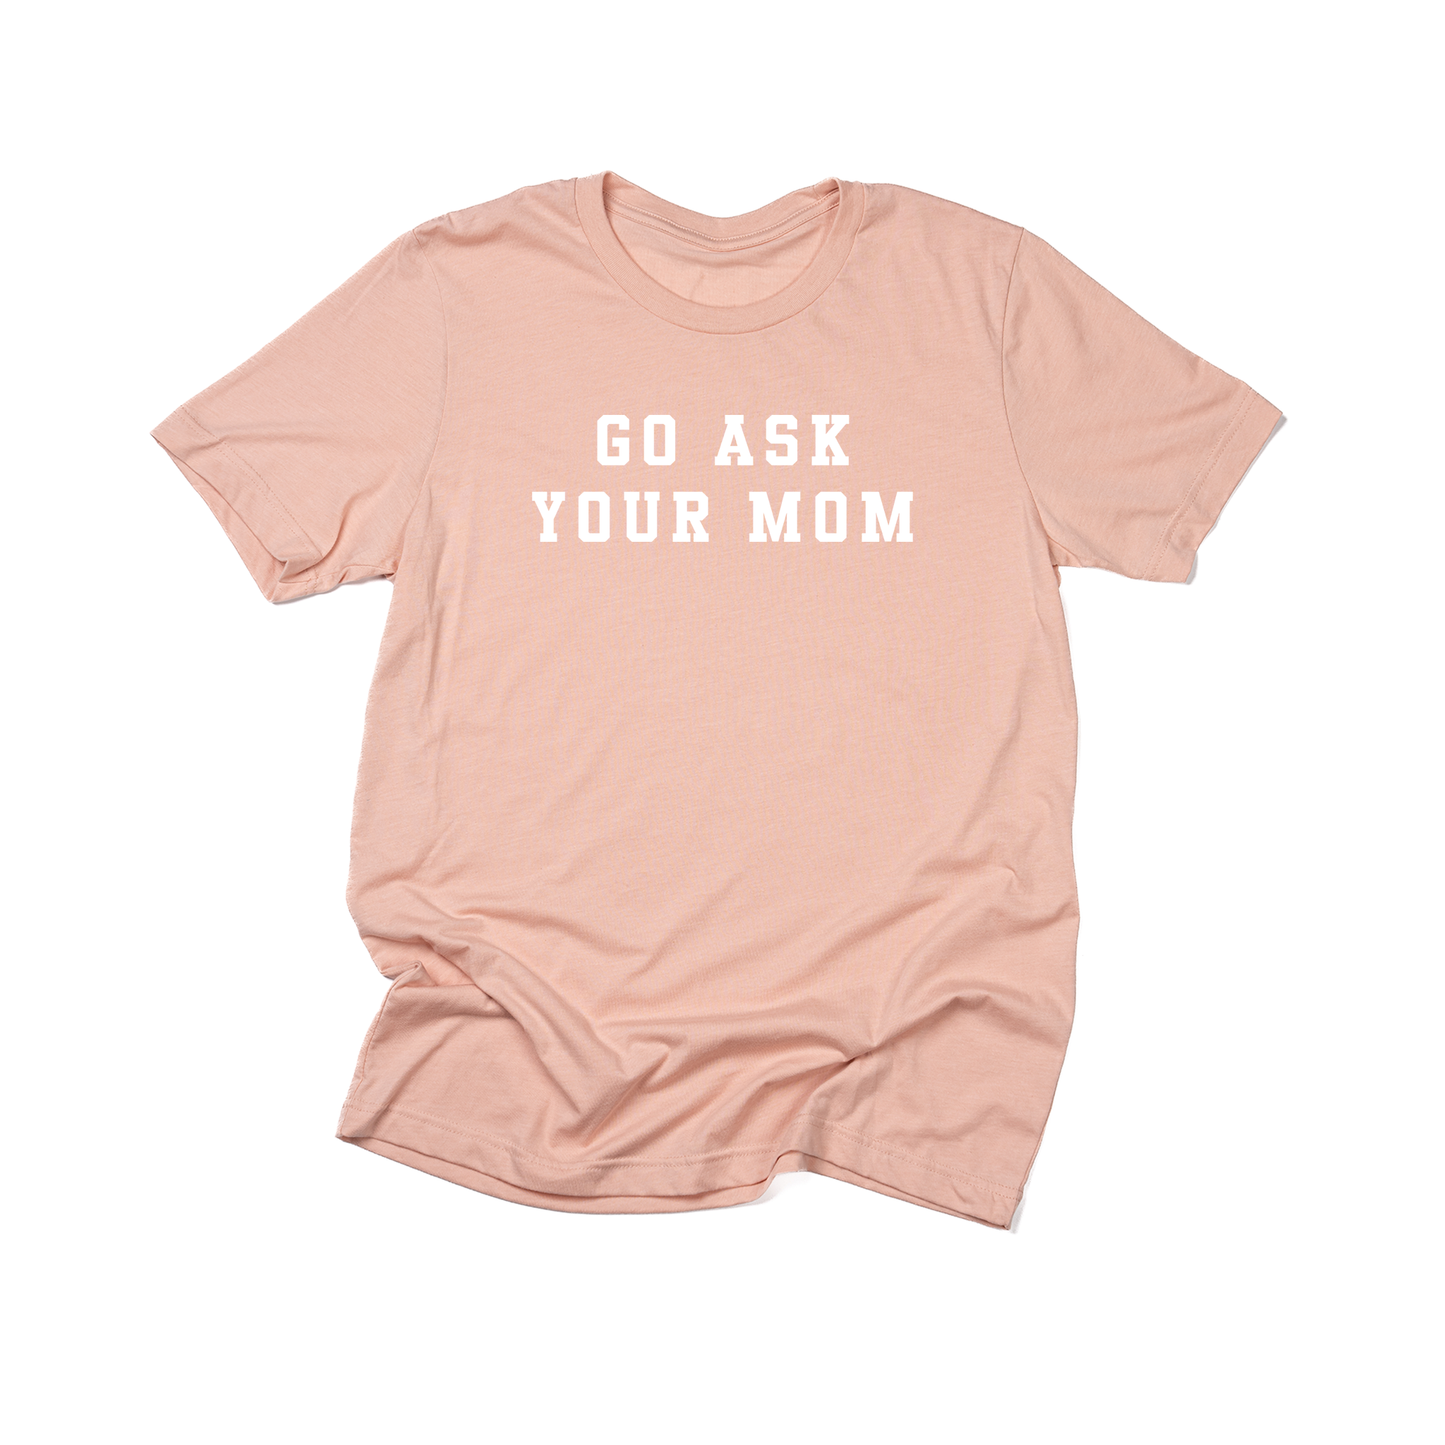 Go Ask Your Mom (White) - Tee (Peach)